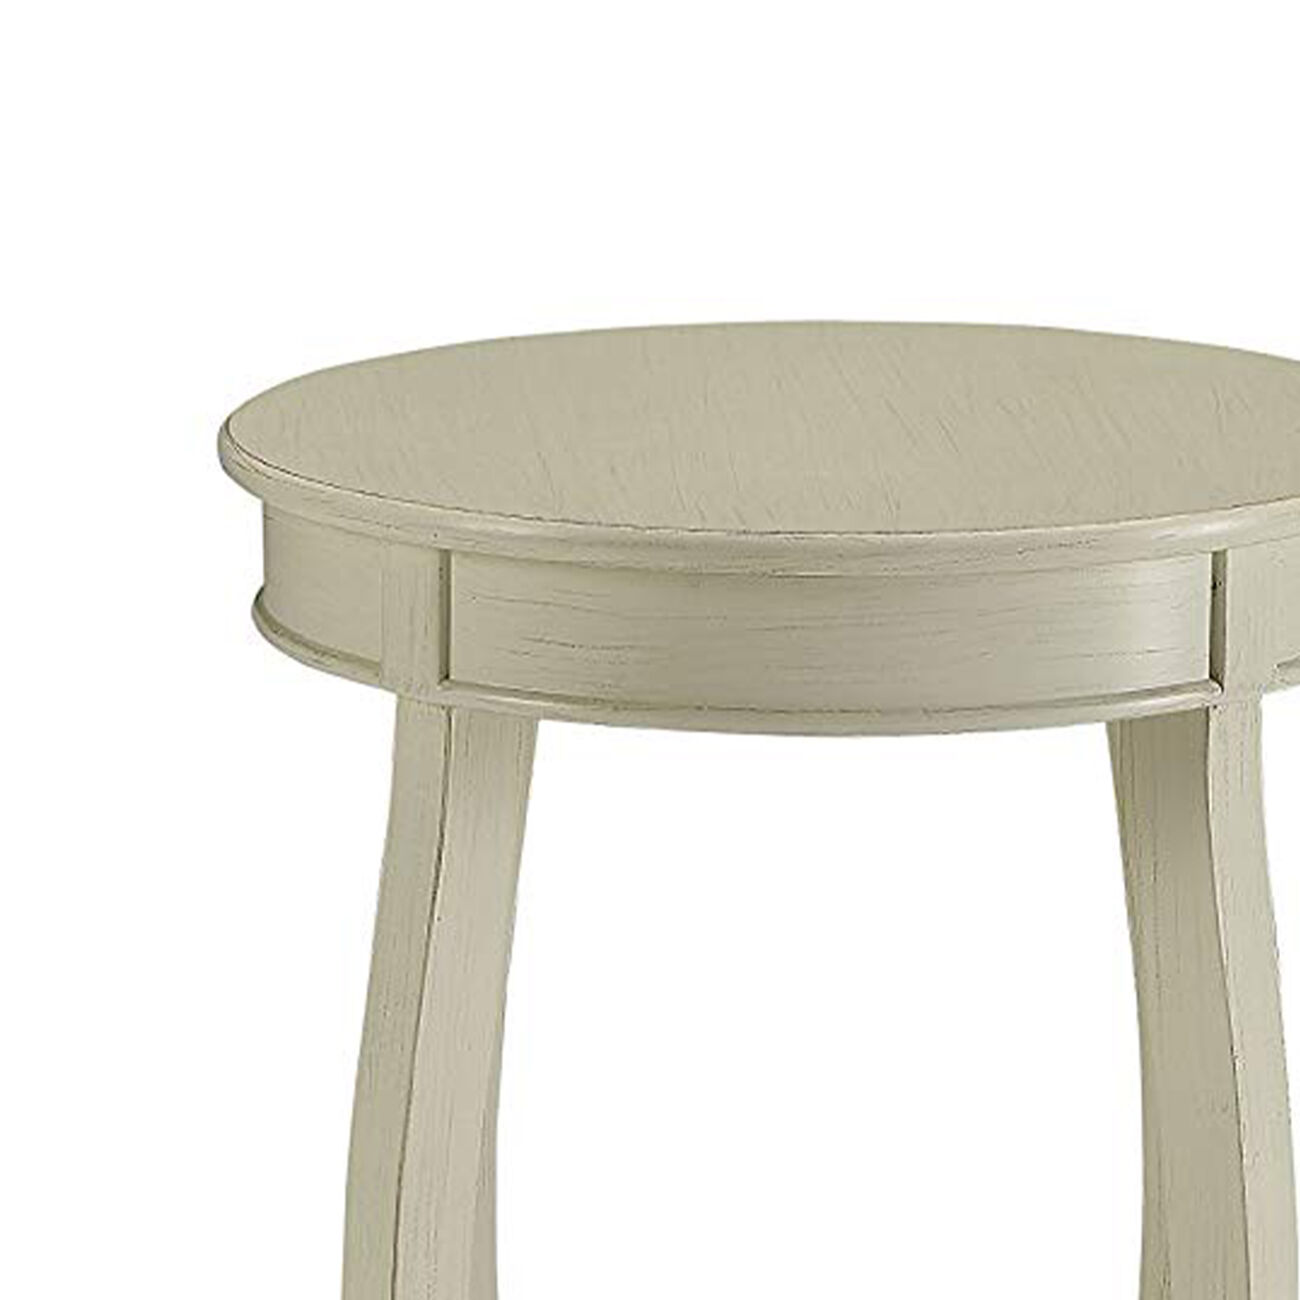 Fashionable Side Table, Antique White